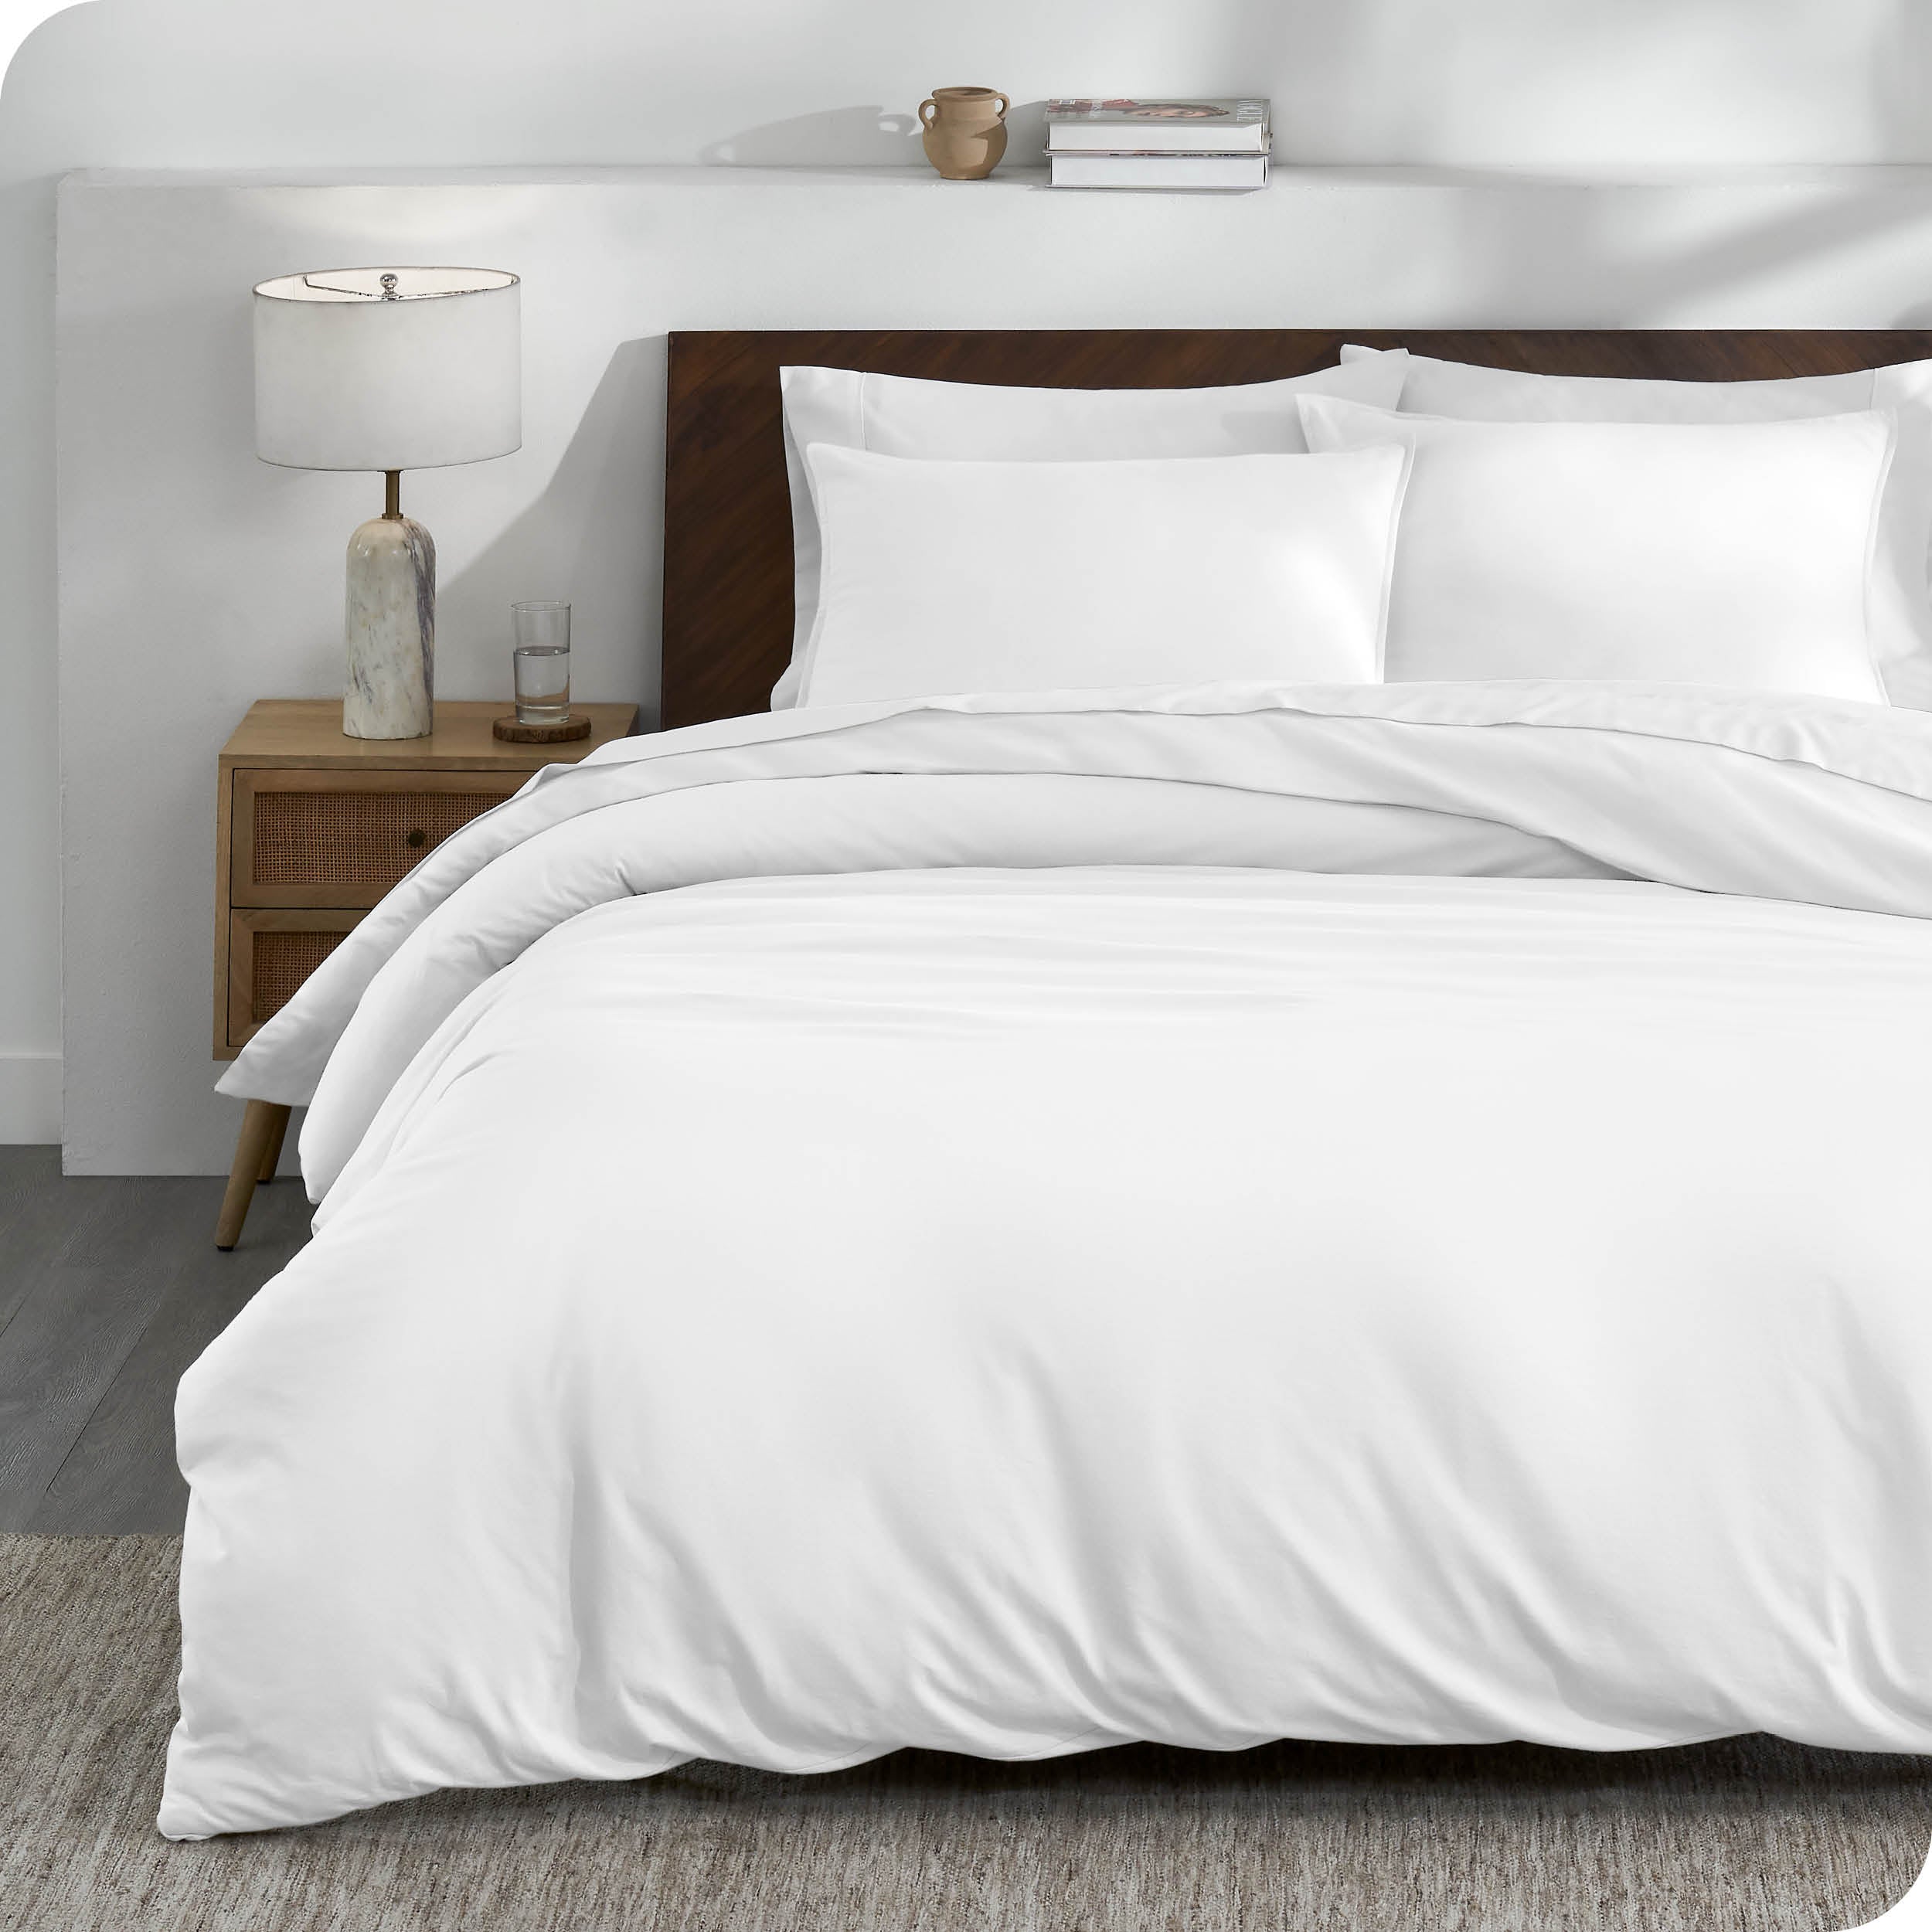 A white organic cotton jersey duvet cover on a bed made with a white bedding